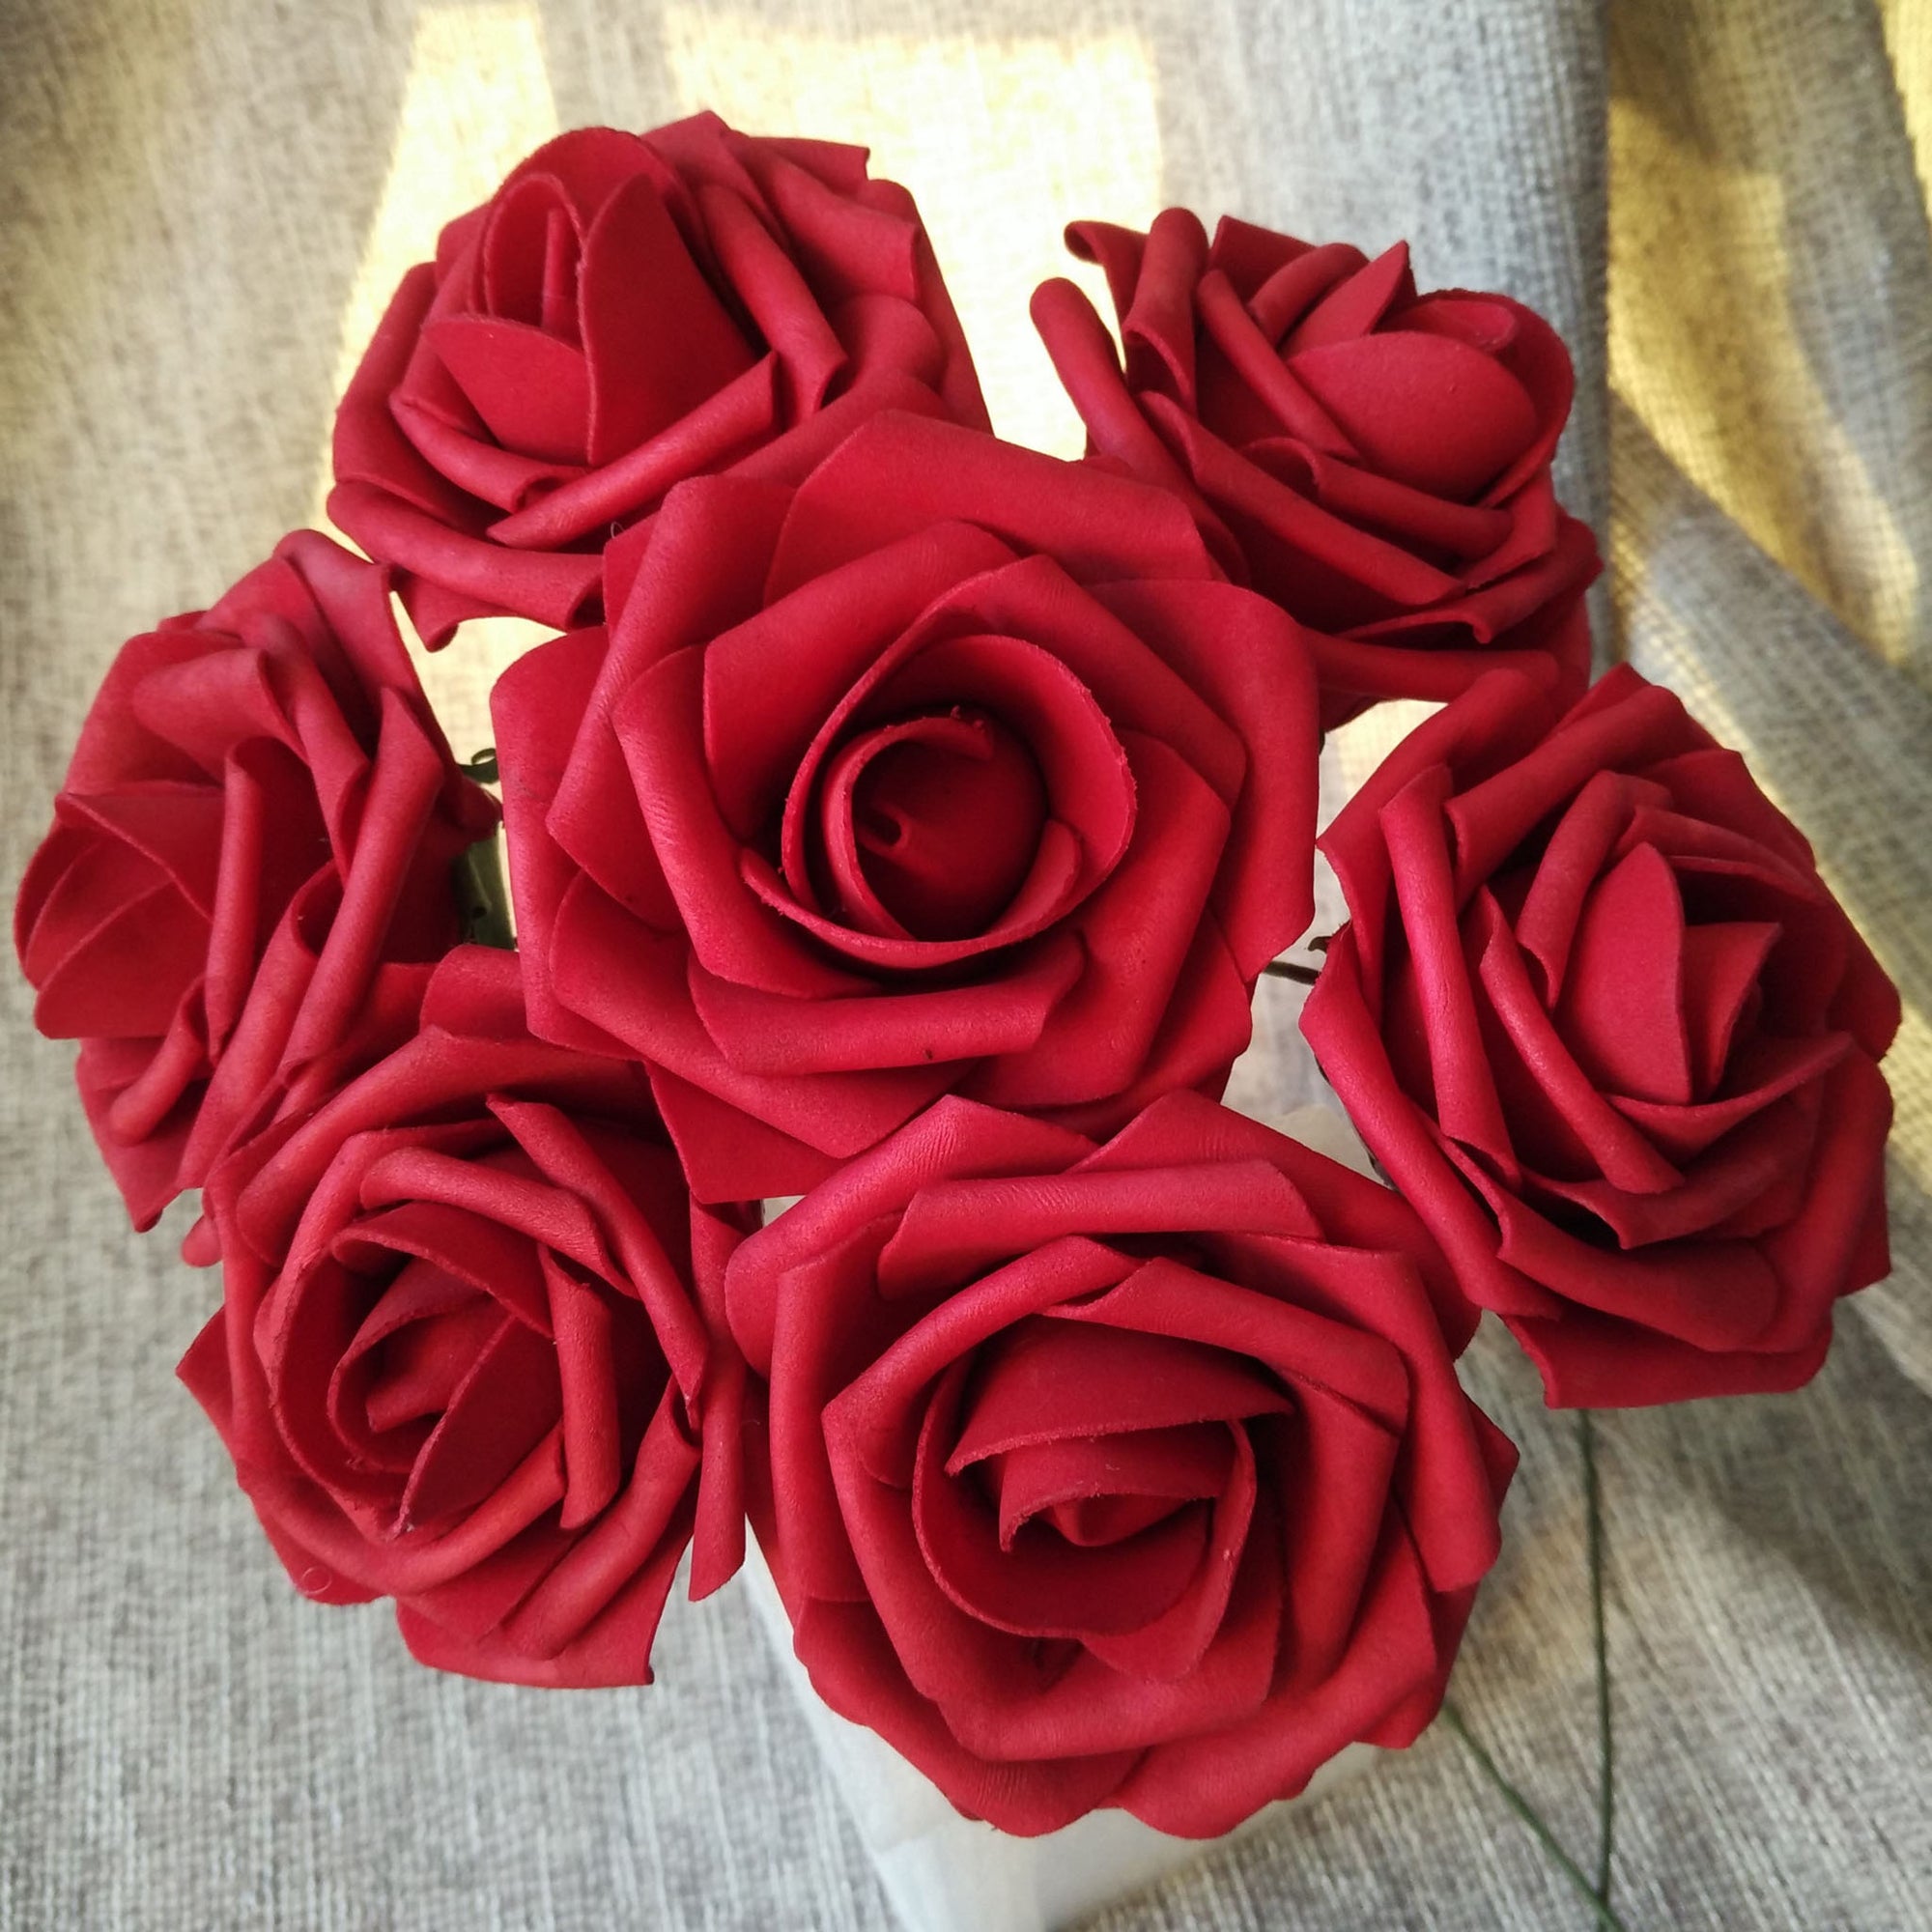 Dark Red Wedding Flowers 50 Ruby Red Roses for Craft